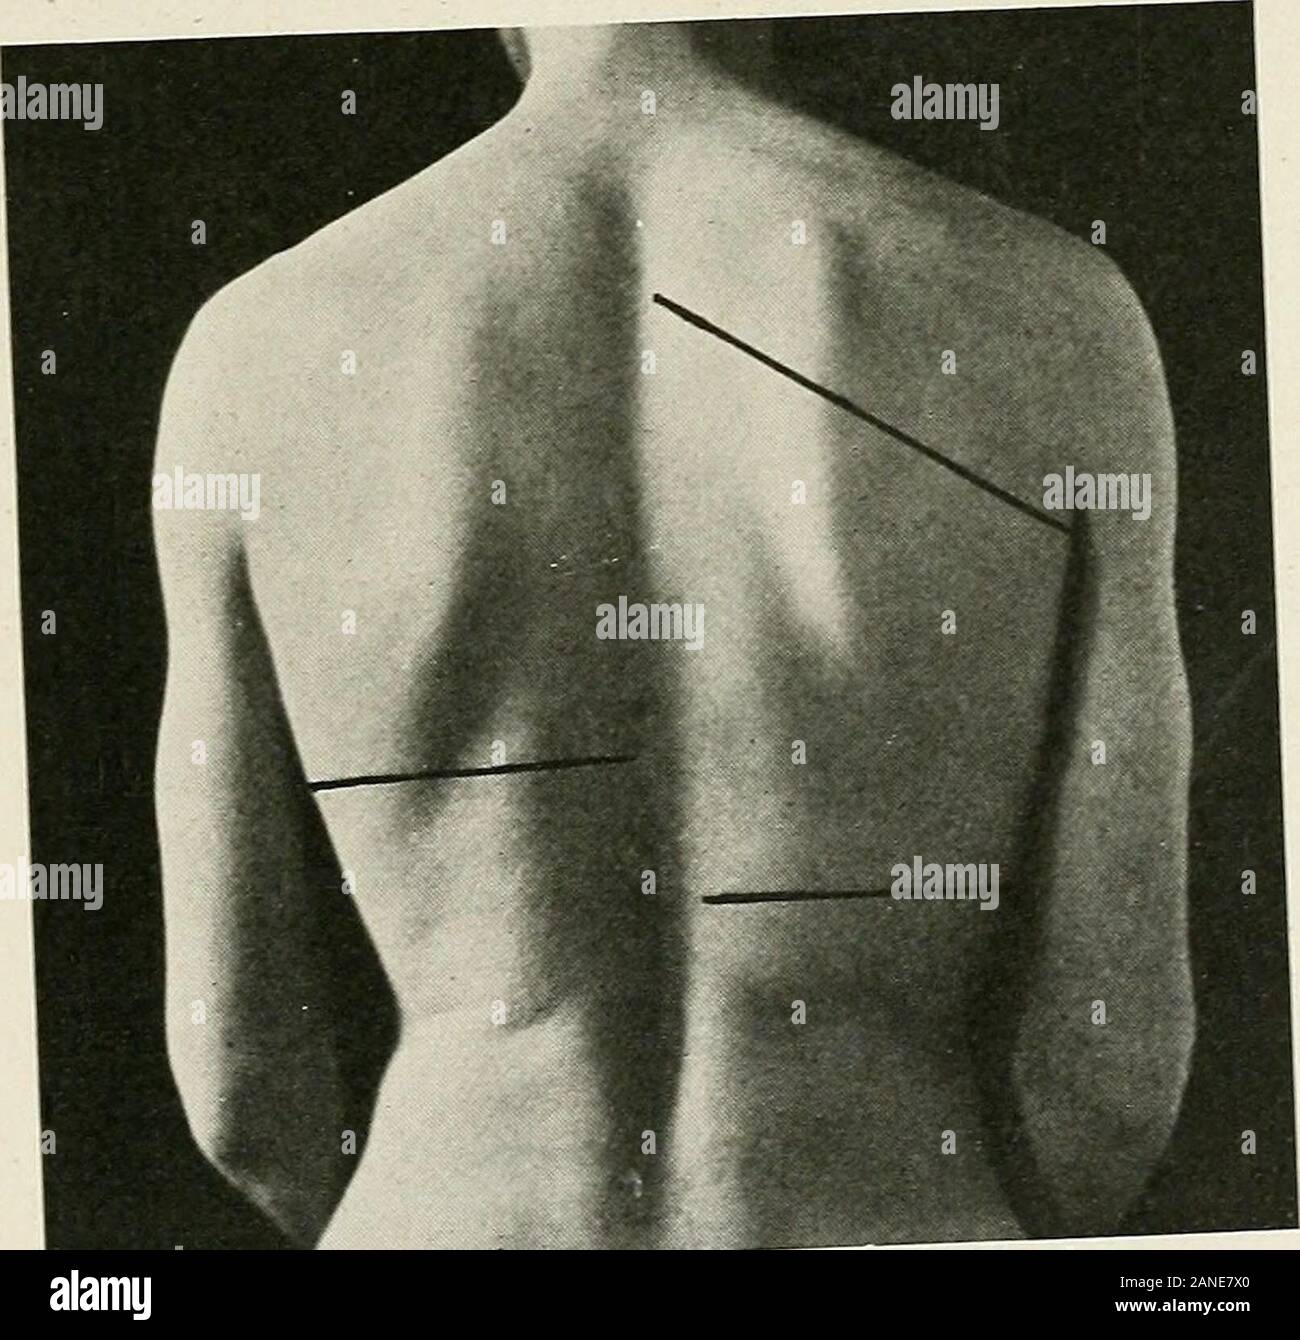 Diseases of the chest and the principles of physical diagnosis . Fig. 339.-Showin, area .kodaic tympany (Garlands triangle).. r,^. 340.-Upper and lower Umits of dulness in a massive effusion. In massive effusions the highest point of cMness^^^^^^^spine (see Fig. 340) and ^^^^fZ^^J^^^^^^ character but lapsed portion of the lung the ^^^^^^^^J^^^^^^^ devoid of air the if?the king has been so completely compiesseci as lo je 584 DISEASES OF THE BRONCHI, LUNGS, PLEURA, AND DIAPHRAG.M note will be dull. In massive effusions the flat or dull percussion noteanteriorly may be elicited some distance to t Stock Photo